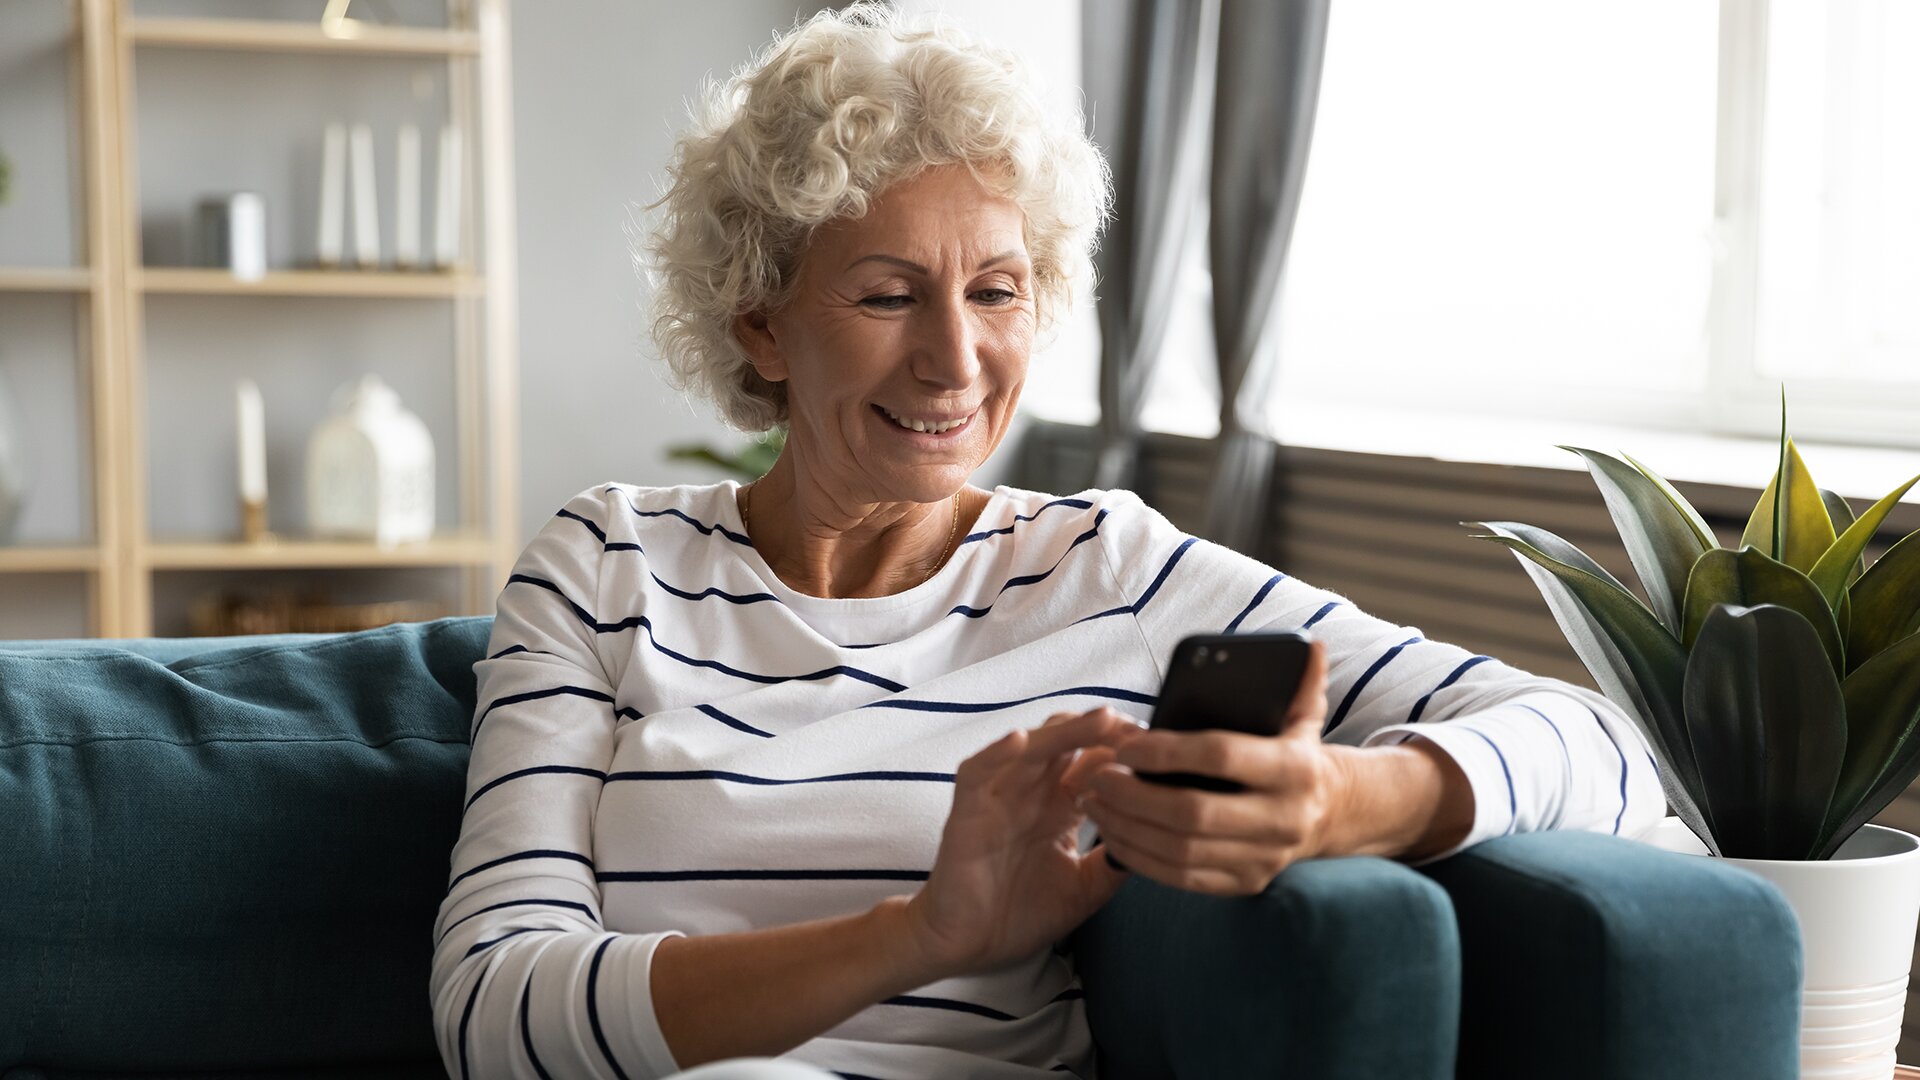 An elderly lady smiling while using mobile in independent living